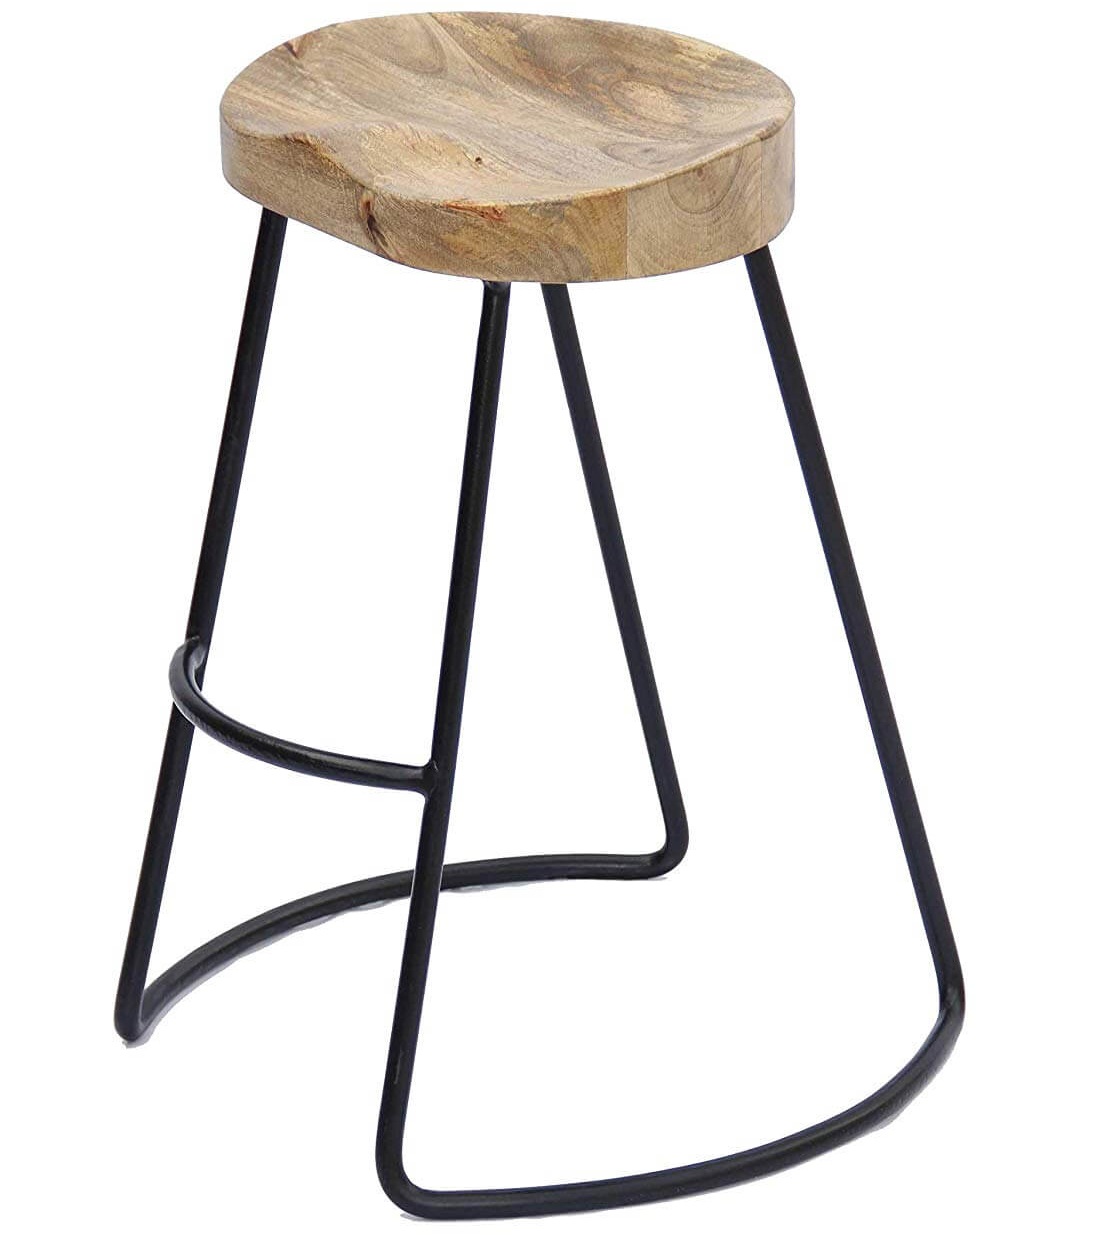 The Urban Port Antique Colonial  Barstool with Iron Legs